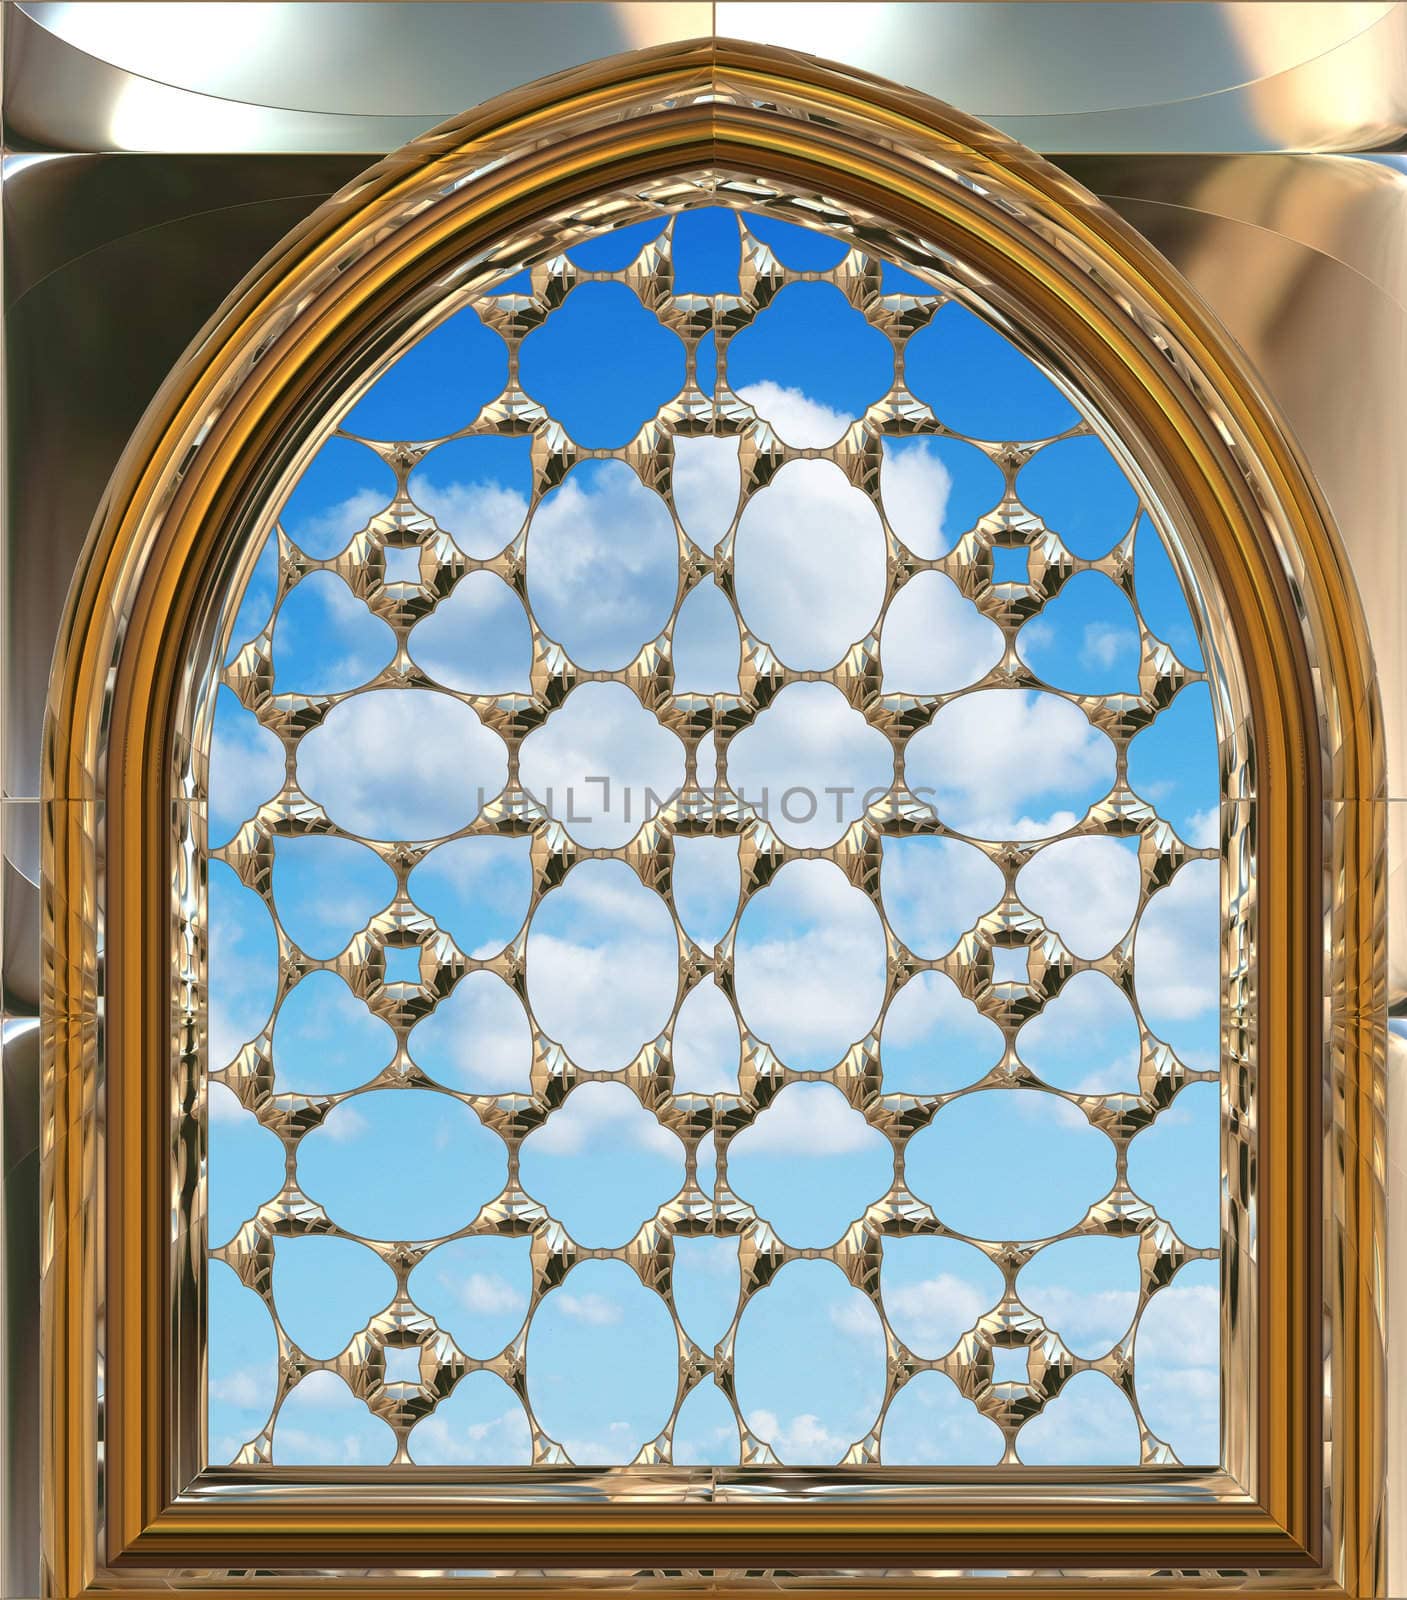 image of a gothic or science fiction window looking onto cloudy blue sky